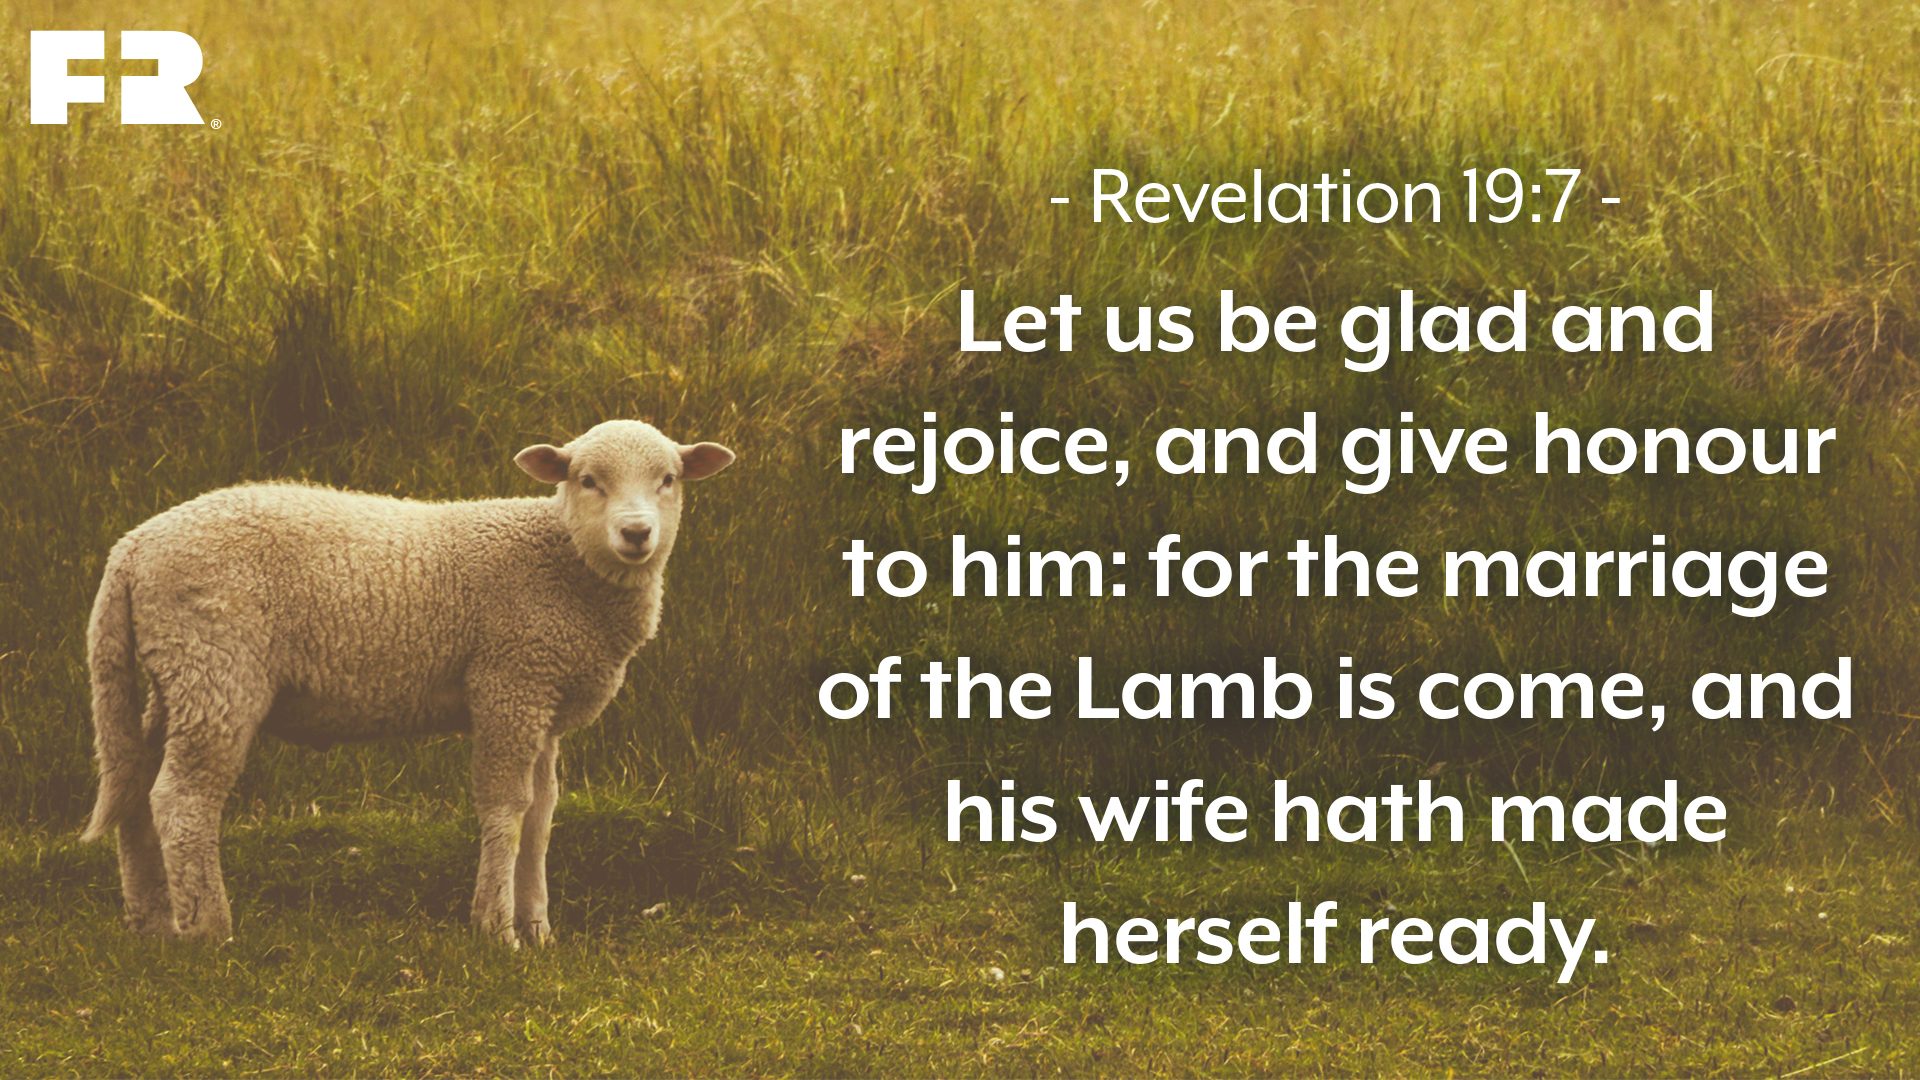 “Let us be glad and rejoice, and give honour to him: for the marriage of the Lamb is come, and his wife hath made herself ready.”